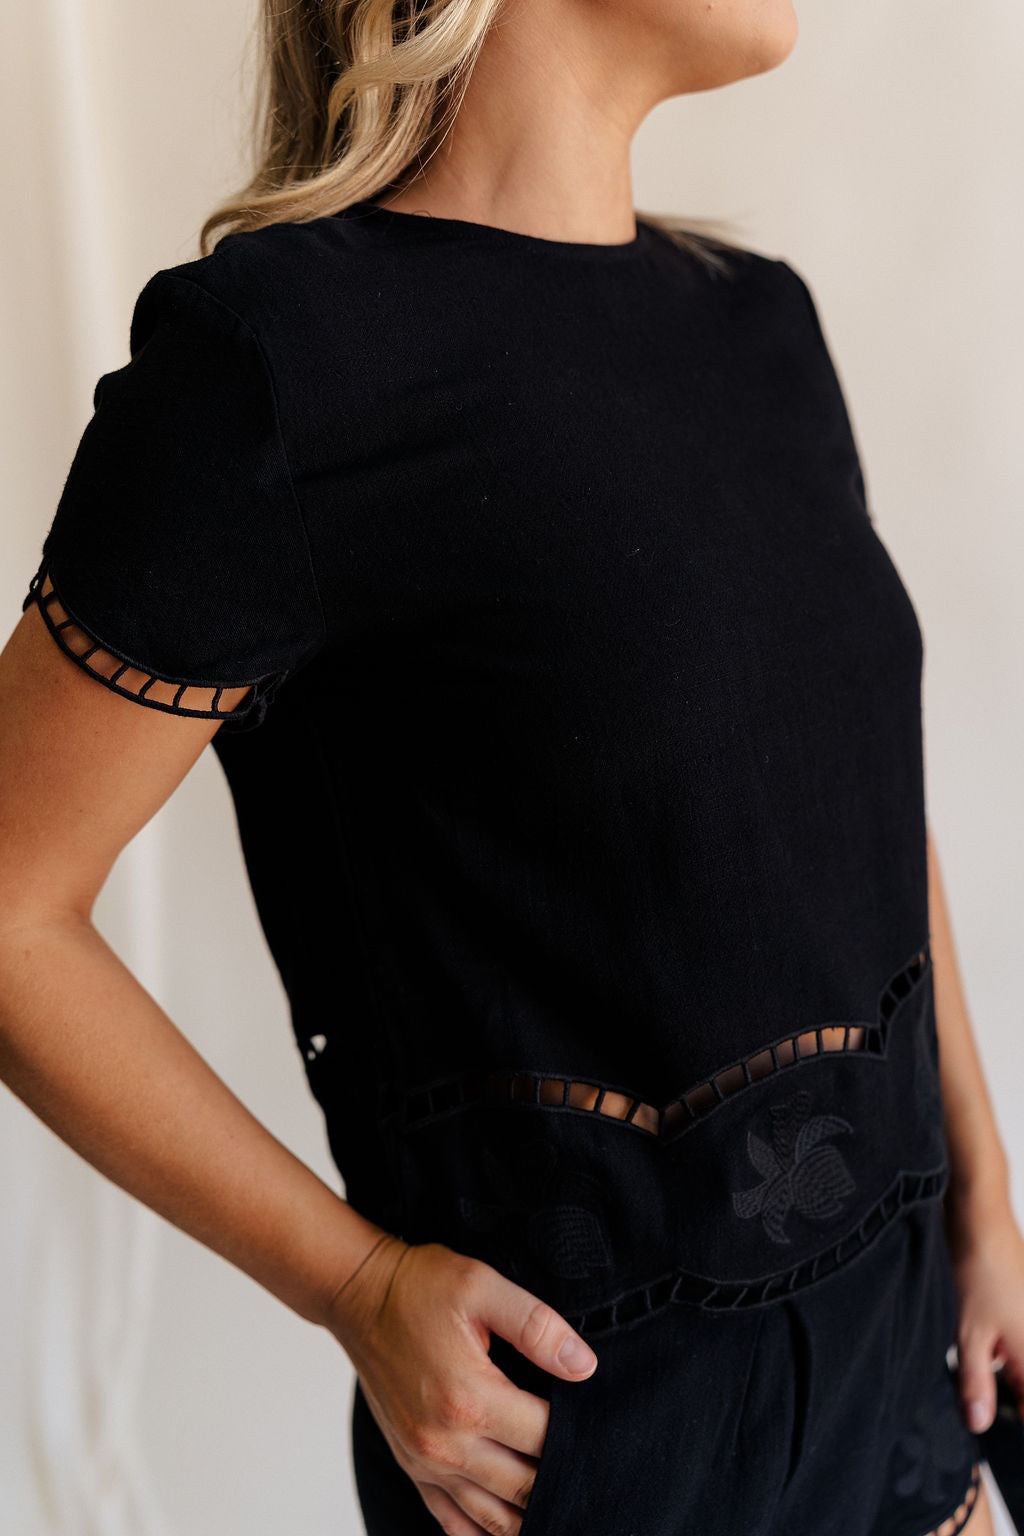 Close up side view of female model wearing the Stella Black Floral Trim Short Sleeve Top which features Black Knit Fabric, Cropped Waist, Scalloped Hem with Open Details, Monochrome Floral Print, Short Sleeves, Round Neckline and Back Button Closure